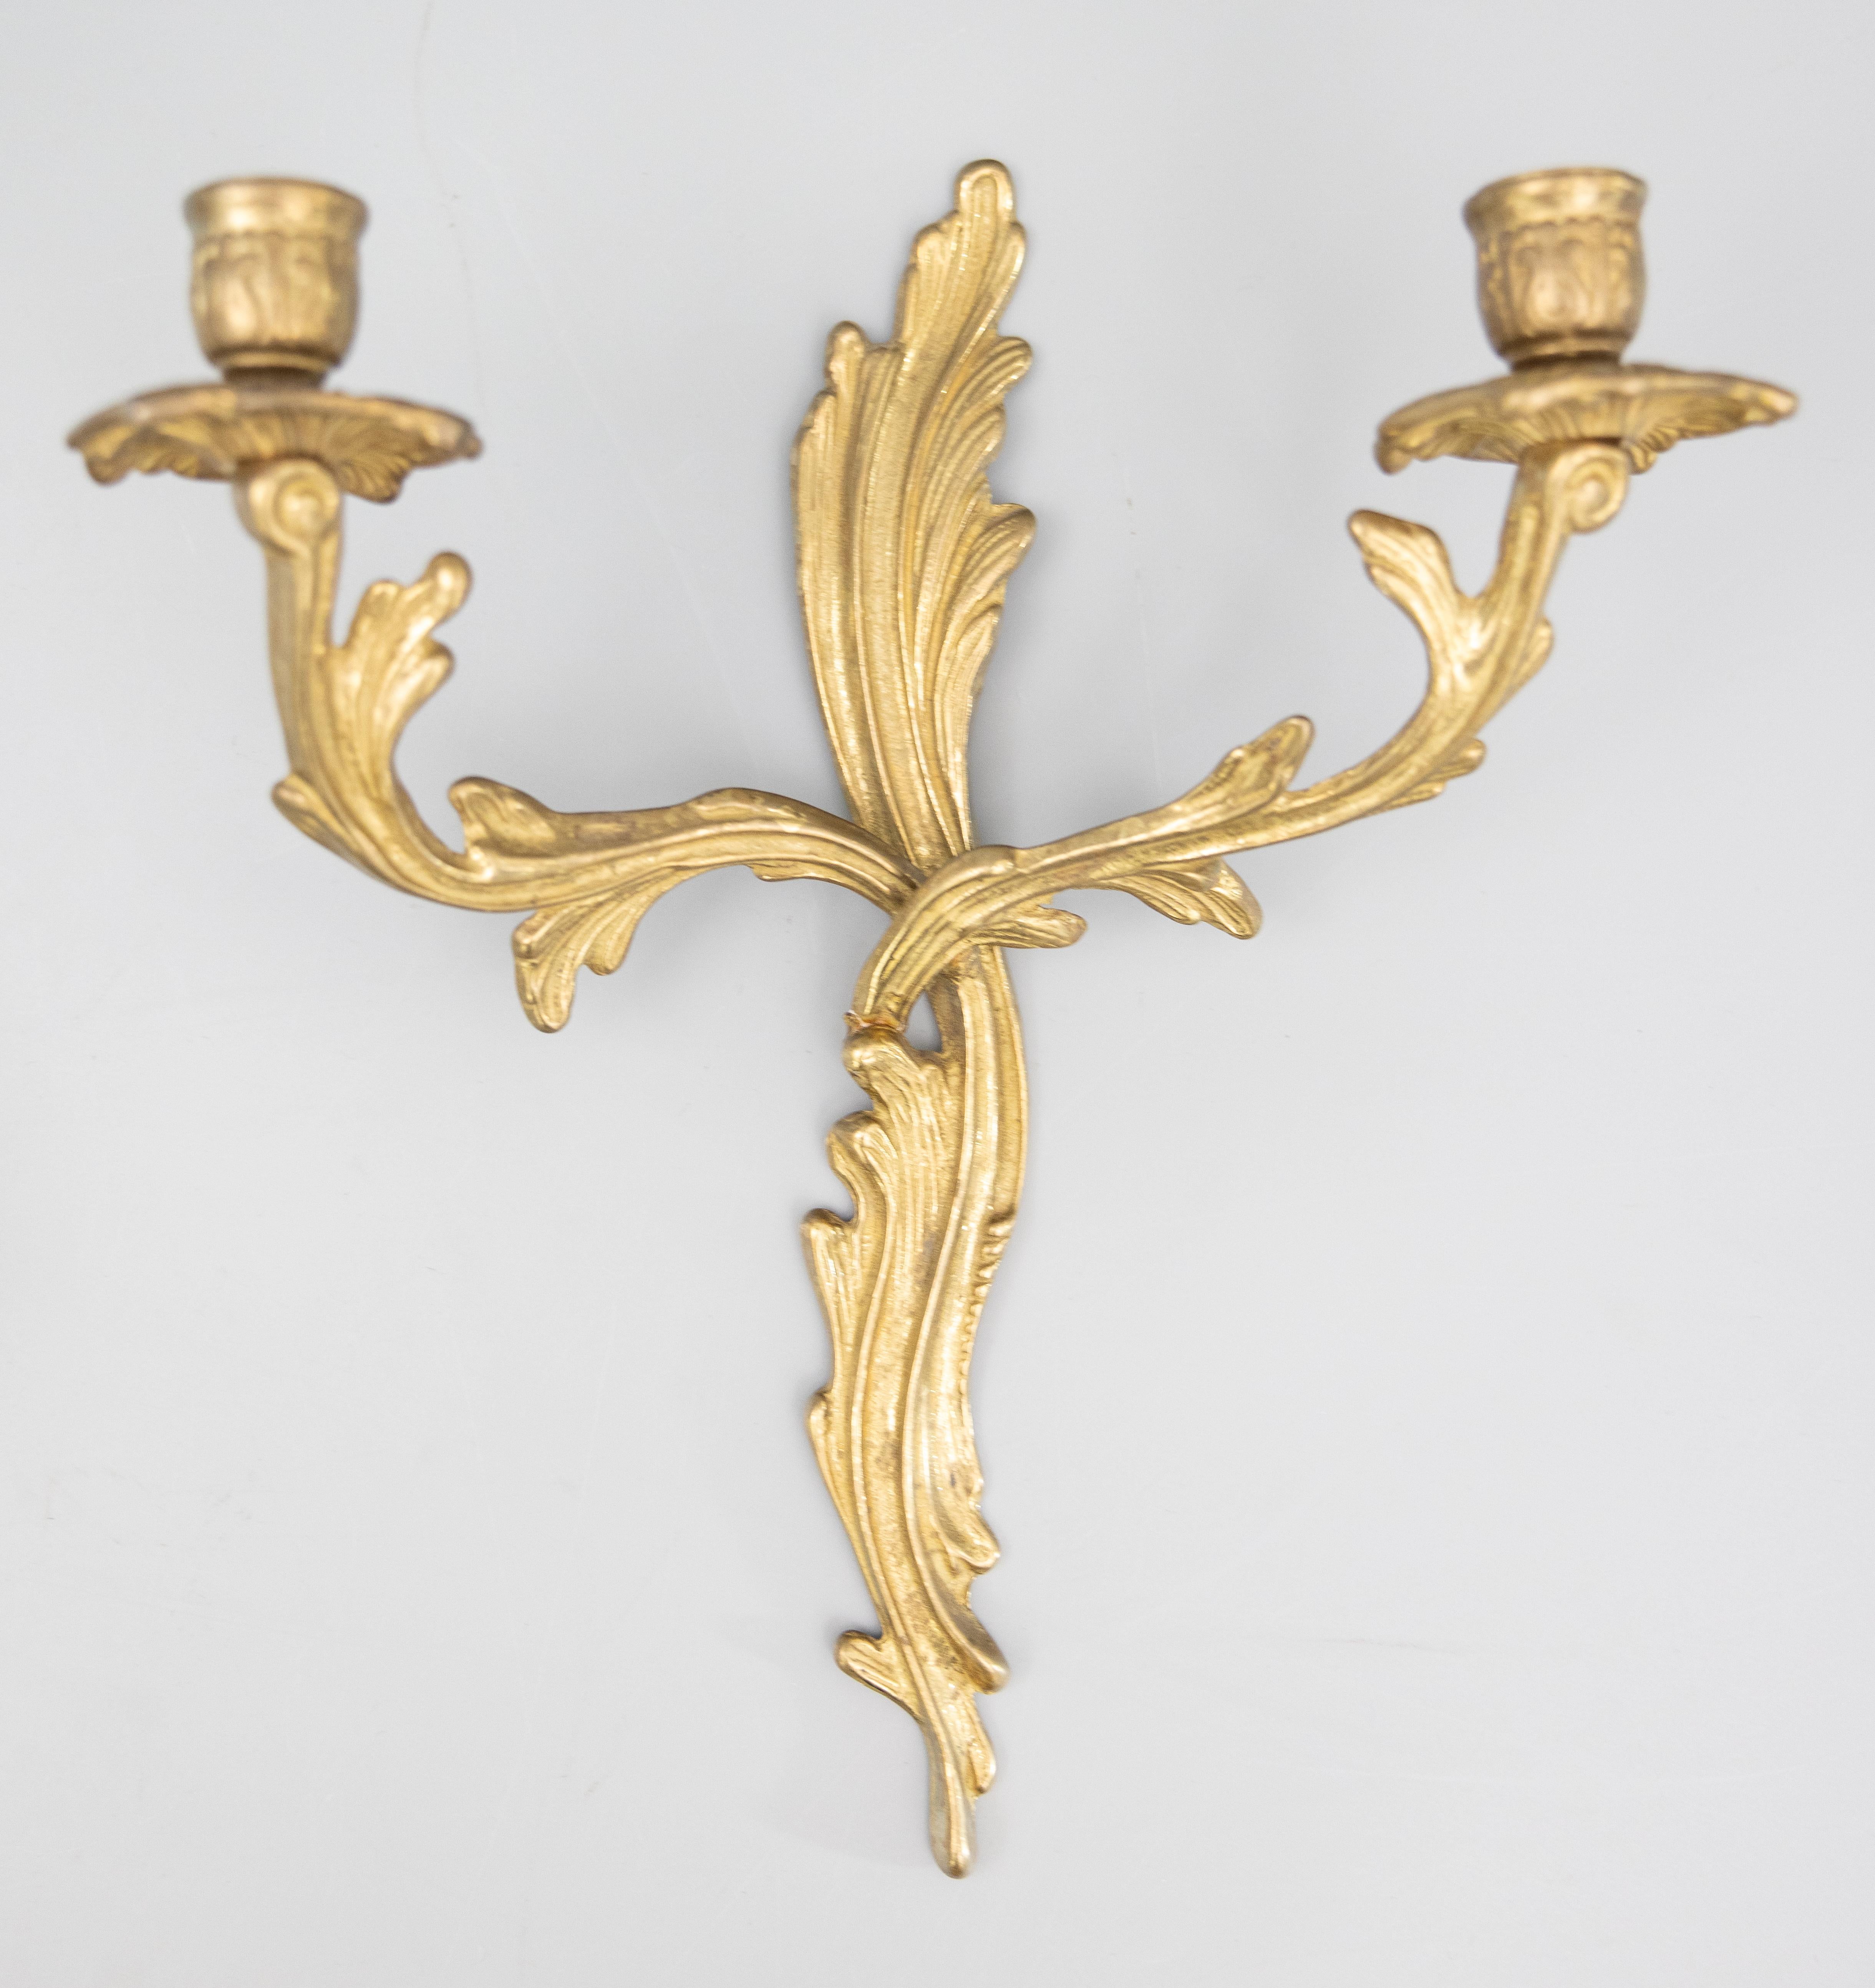 20th Century Pair of Antique French Rococo Style Gilt Brass Candelabras Wall Candle Sconces For Sale